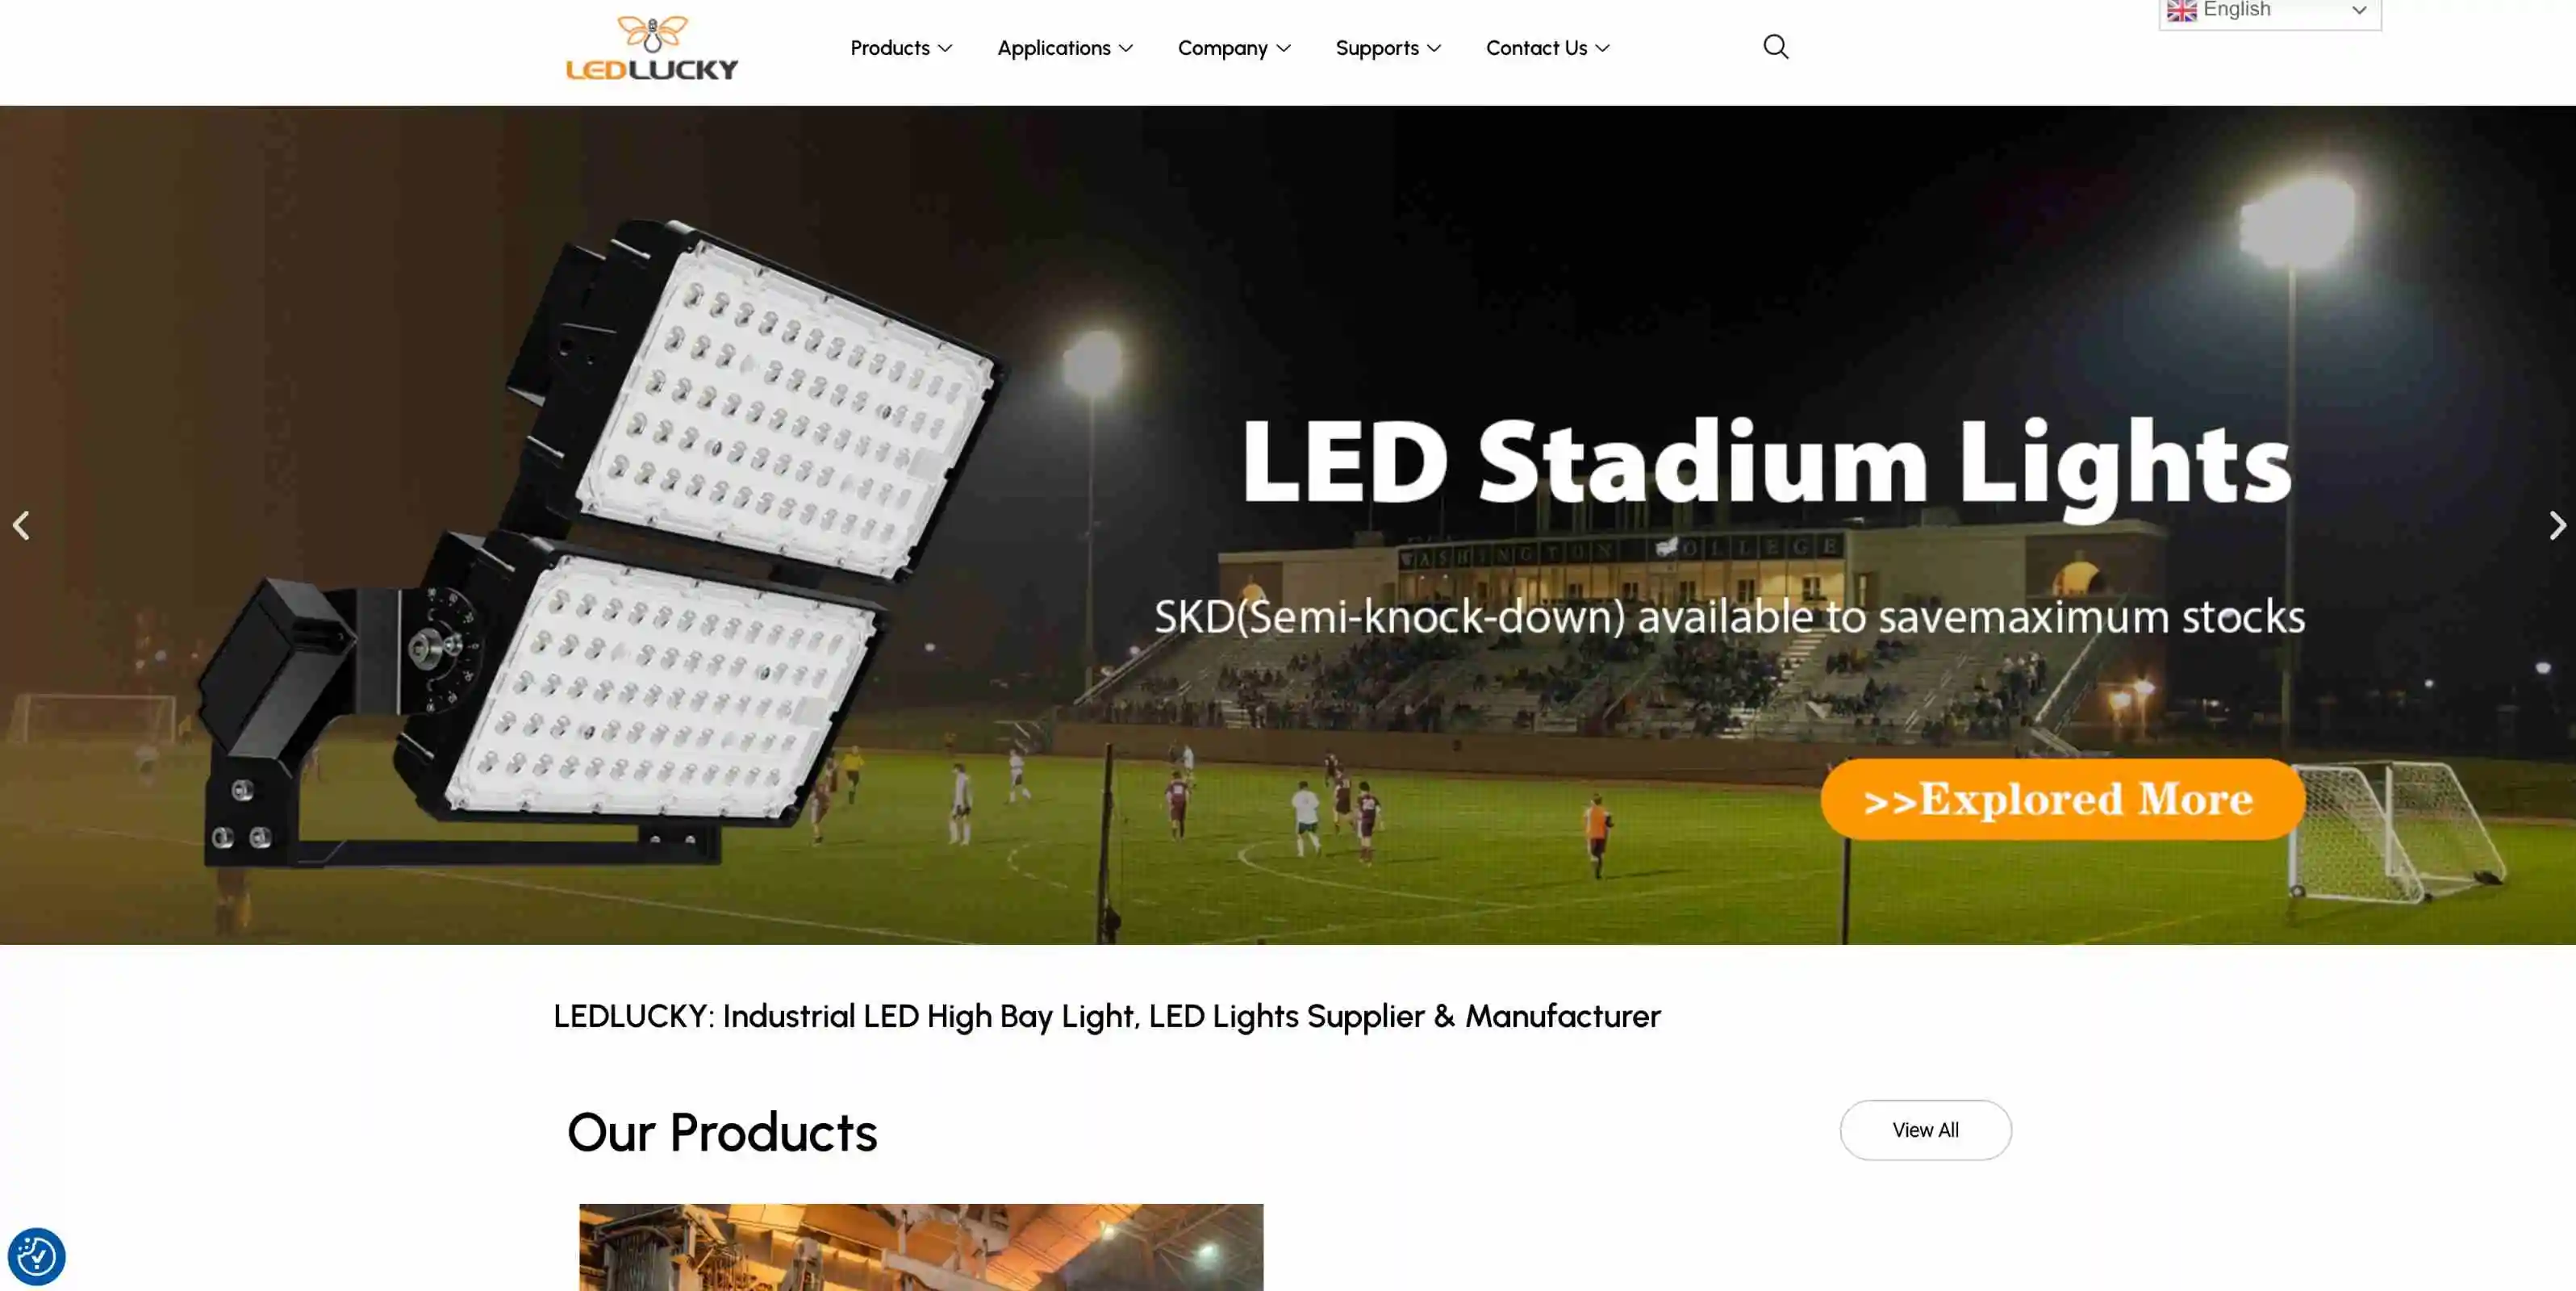 Homepage of LEDLUCKY Holdings website showcasing a variety of high quality LED stadium lights